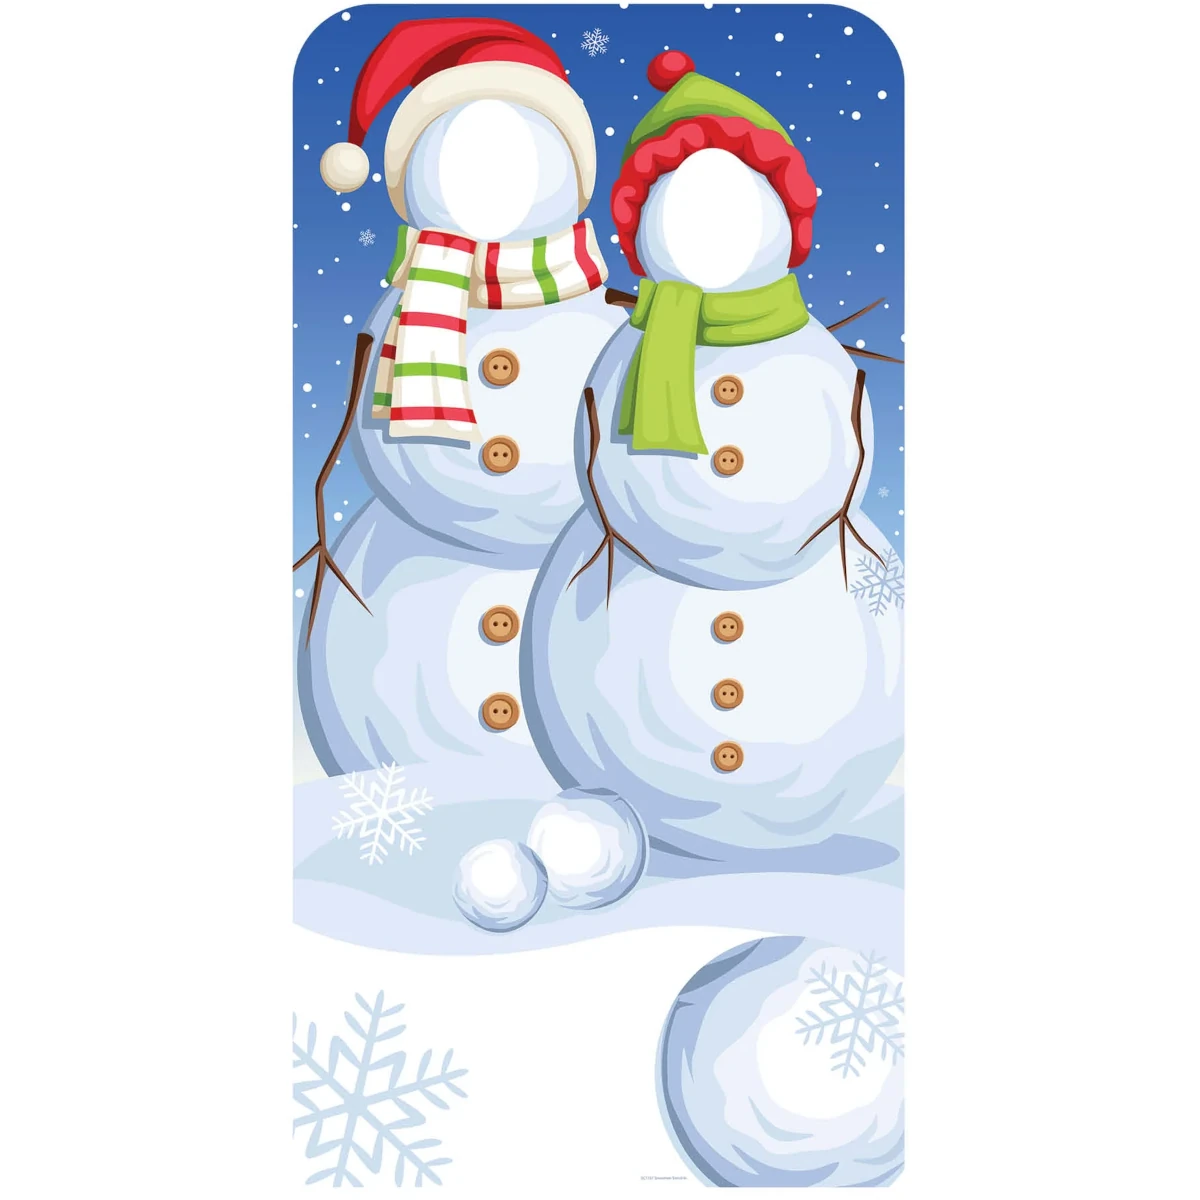 SC1157 Christmas Snowmen Lifesize Stand-In Cardboard Cutout Standee